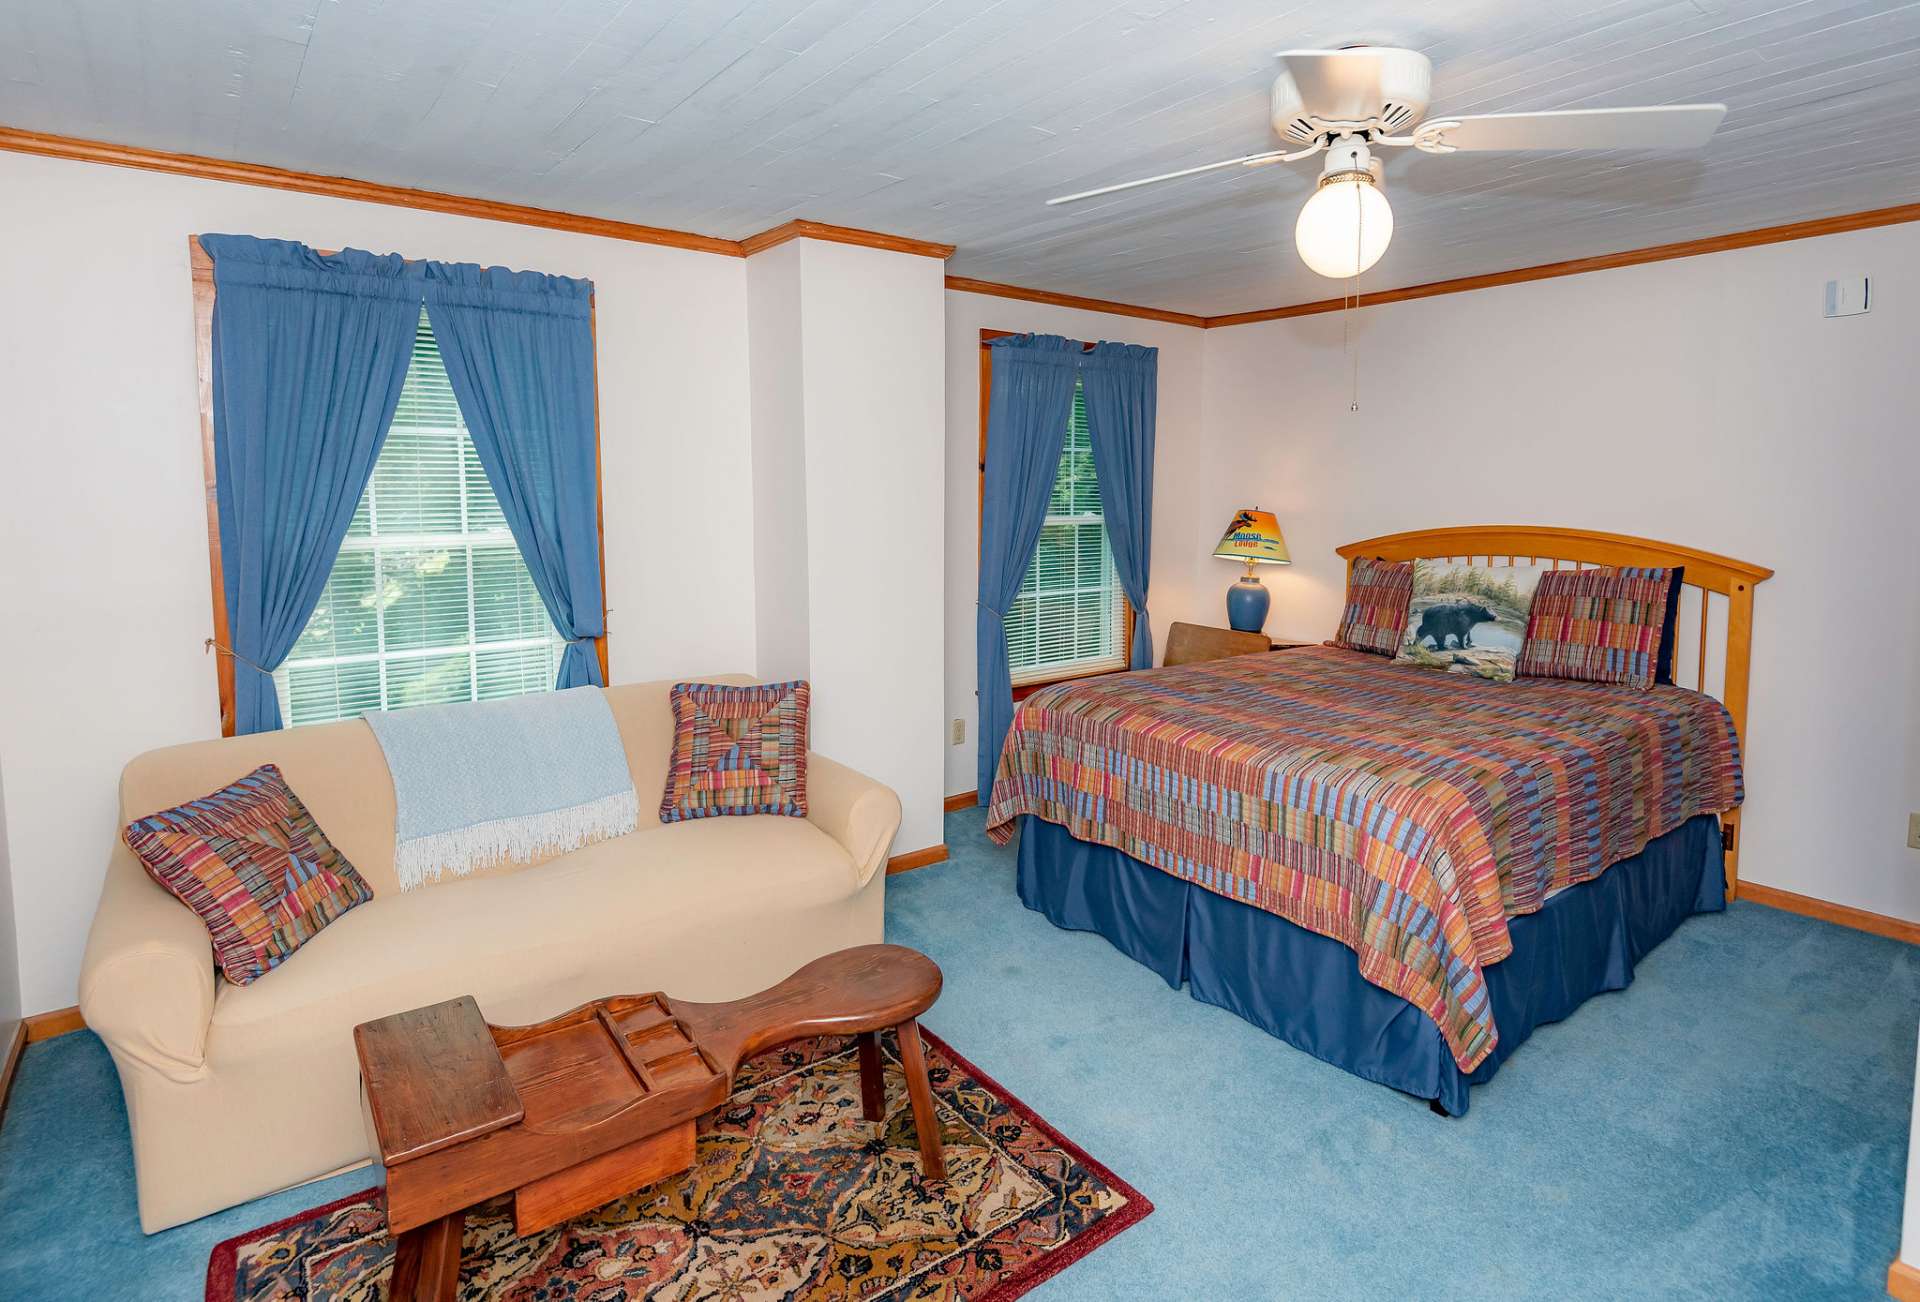 The second upper level bedroom offers lots of natural light and space for a sitting area.